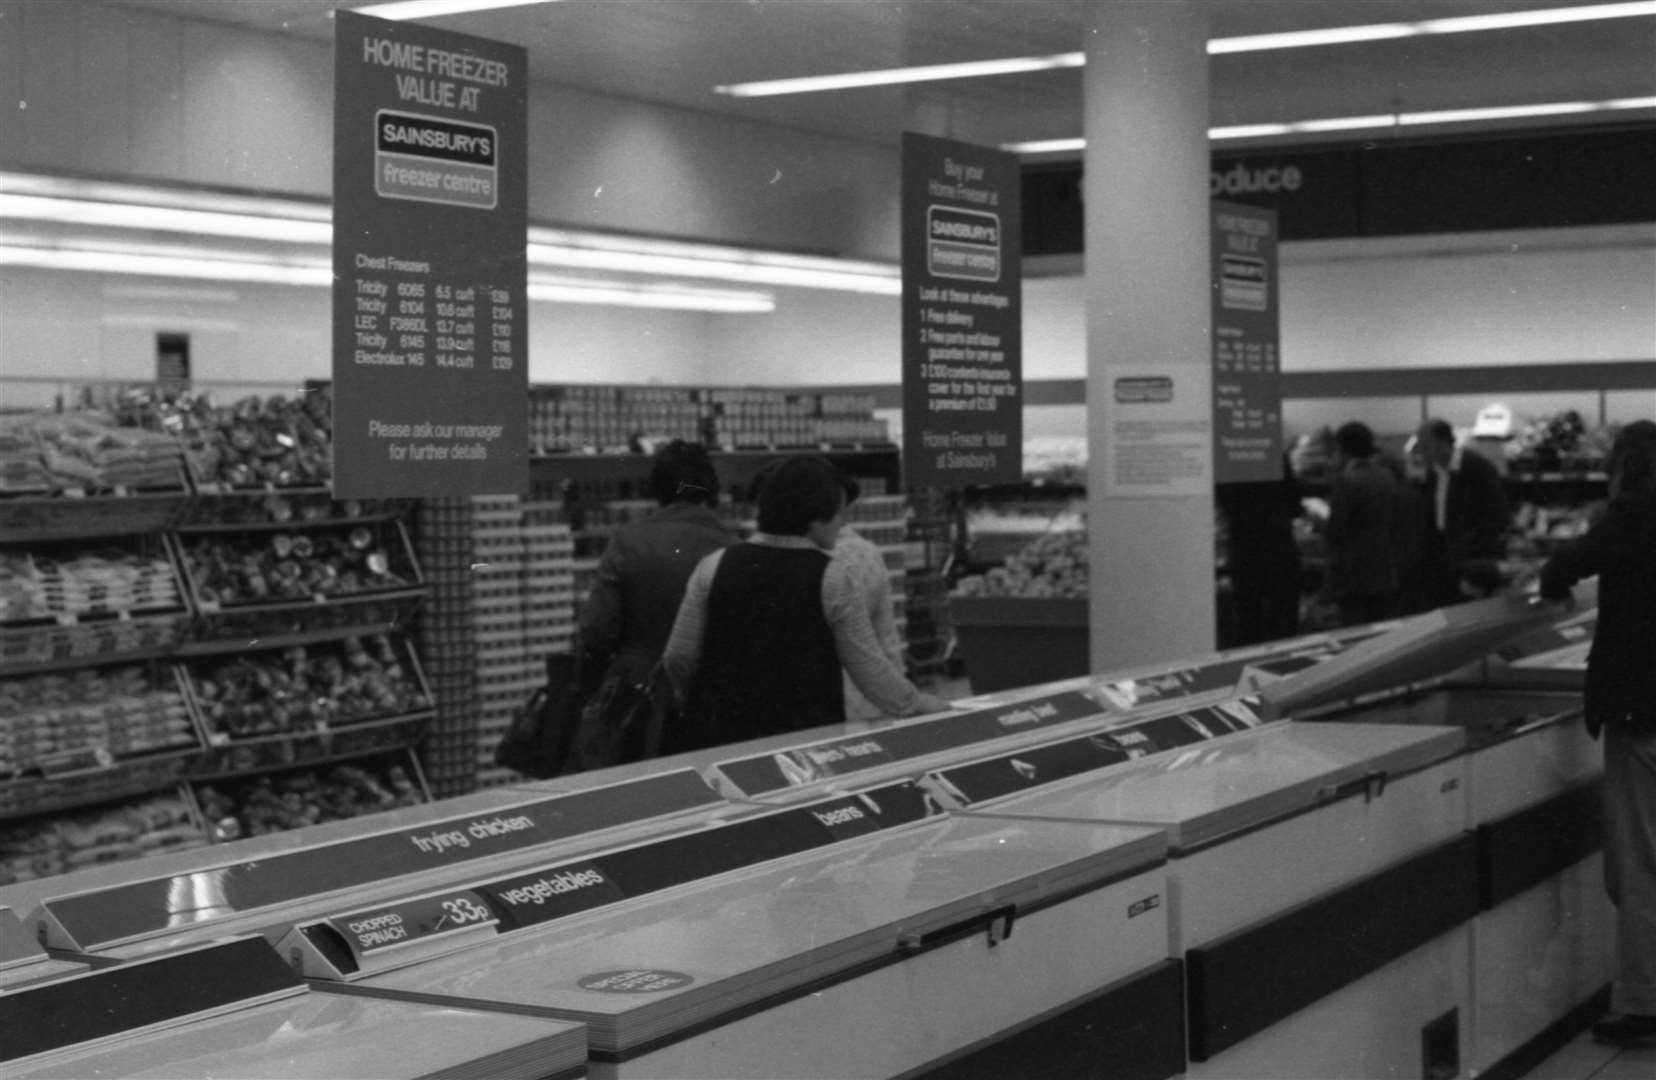 Inside the Bell Shopping Centre store in Sittingbourne in 1976. Picture: The Sainsbury Archive, Museum of London Docklands